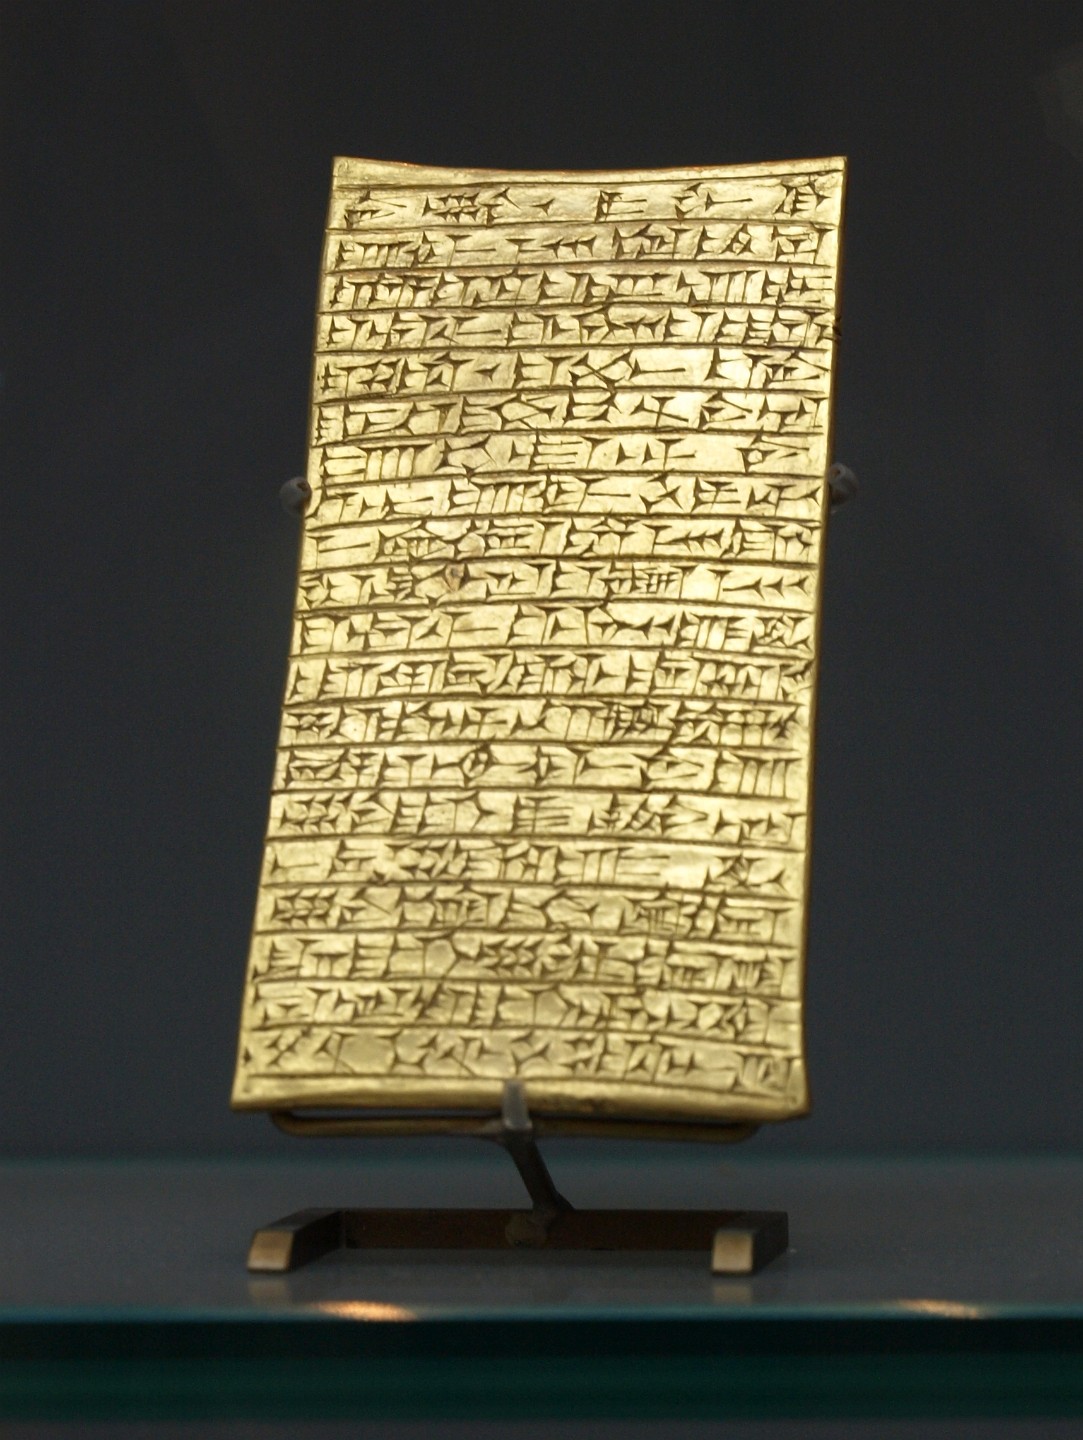 Golden Tablet Found in the Palace of King Sargon II